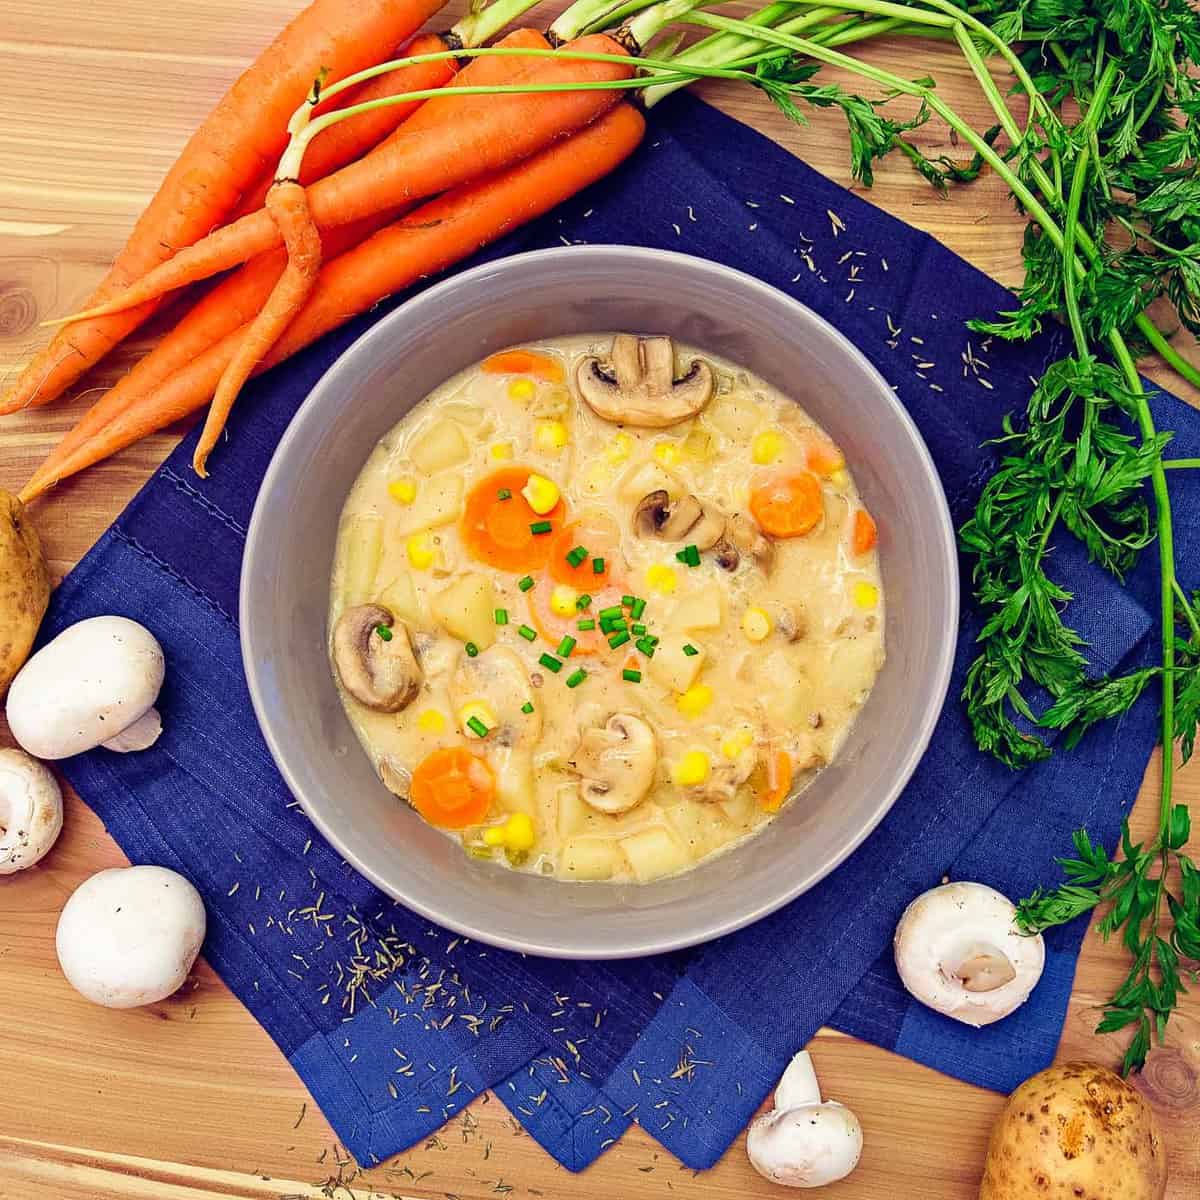 vegan clam chowder, chowder, soup, recipe, vegan, vegetarian, whole food plant based, wfpb, gluten free, oil free, refined sugar free, no oil, no refined sugar, no dairy, dinner, lunch, appetizer, dinner party, entertaining, simple, healthy